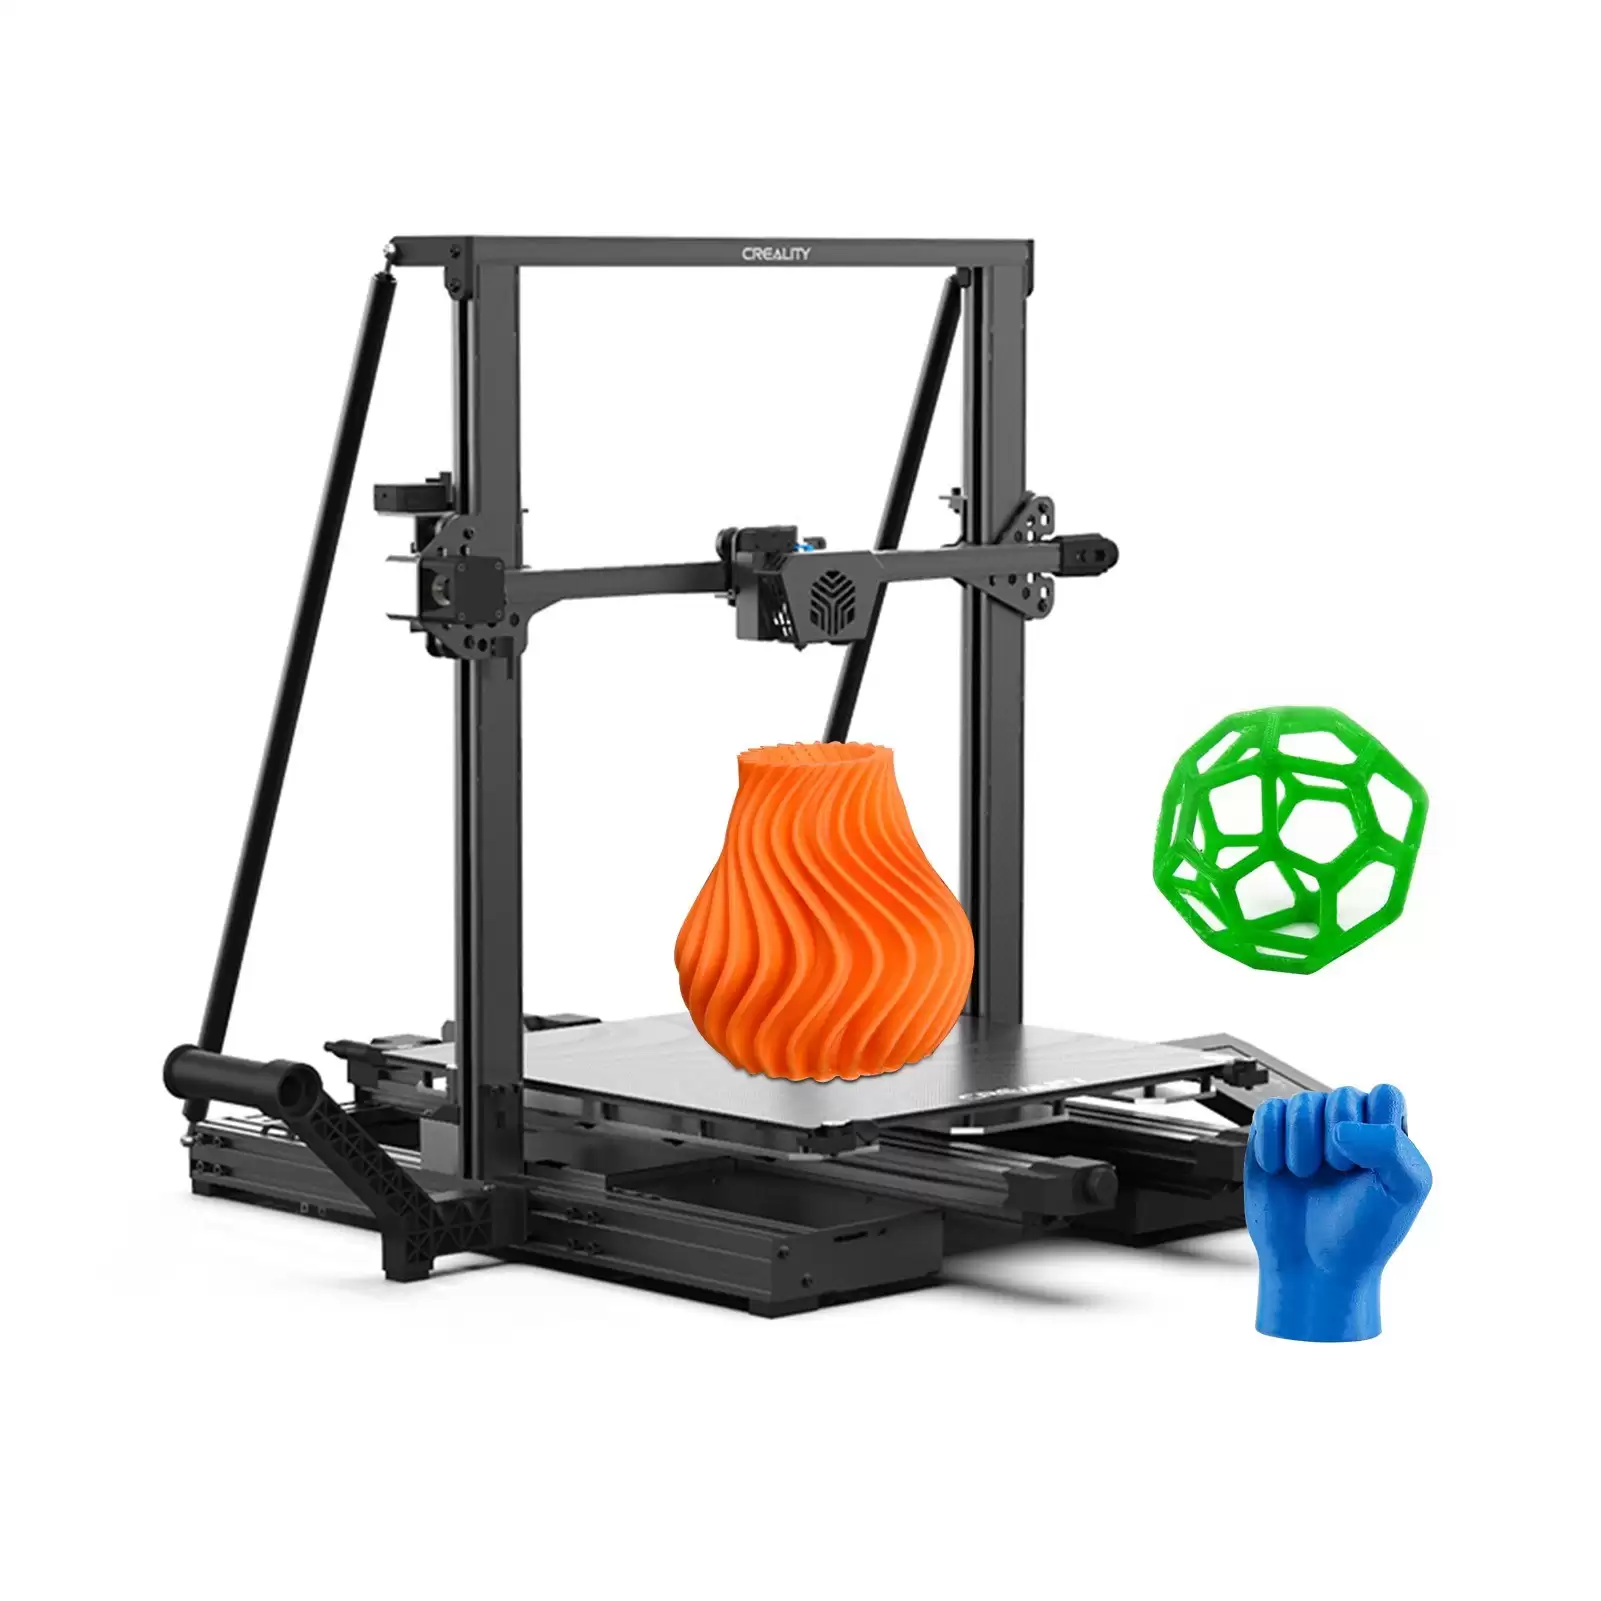 Get $140 Discount On Original Creality Cr-6 Max High Precision 3d Printer At Tomtop